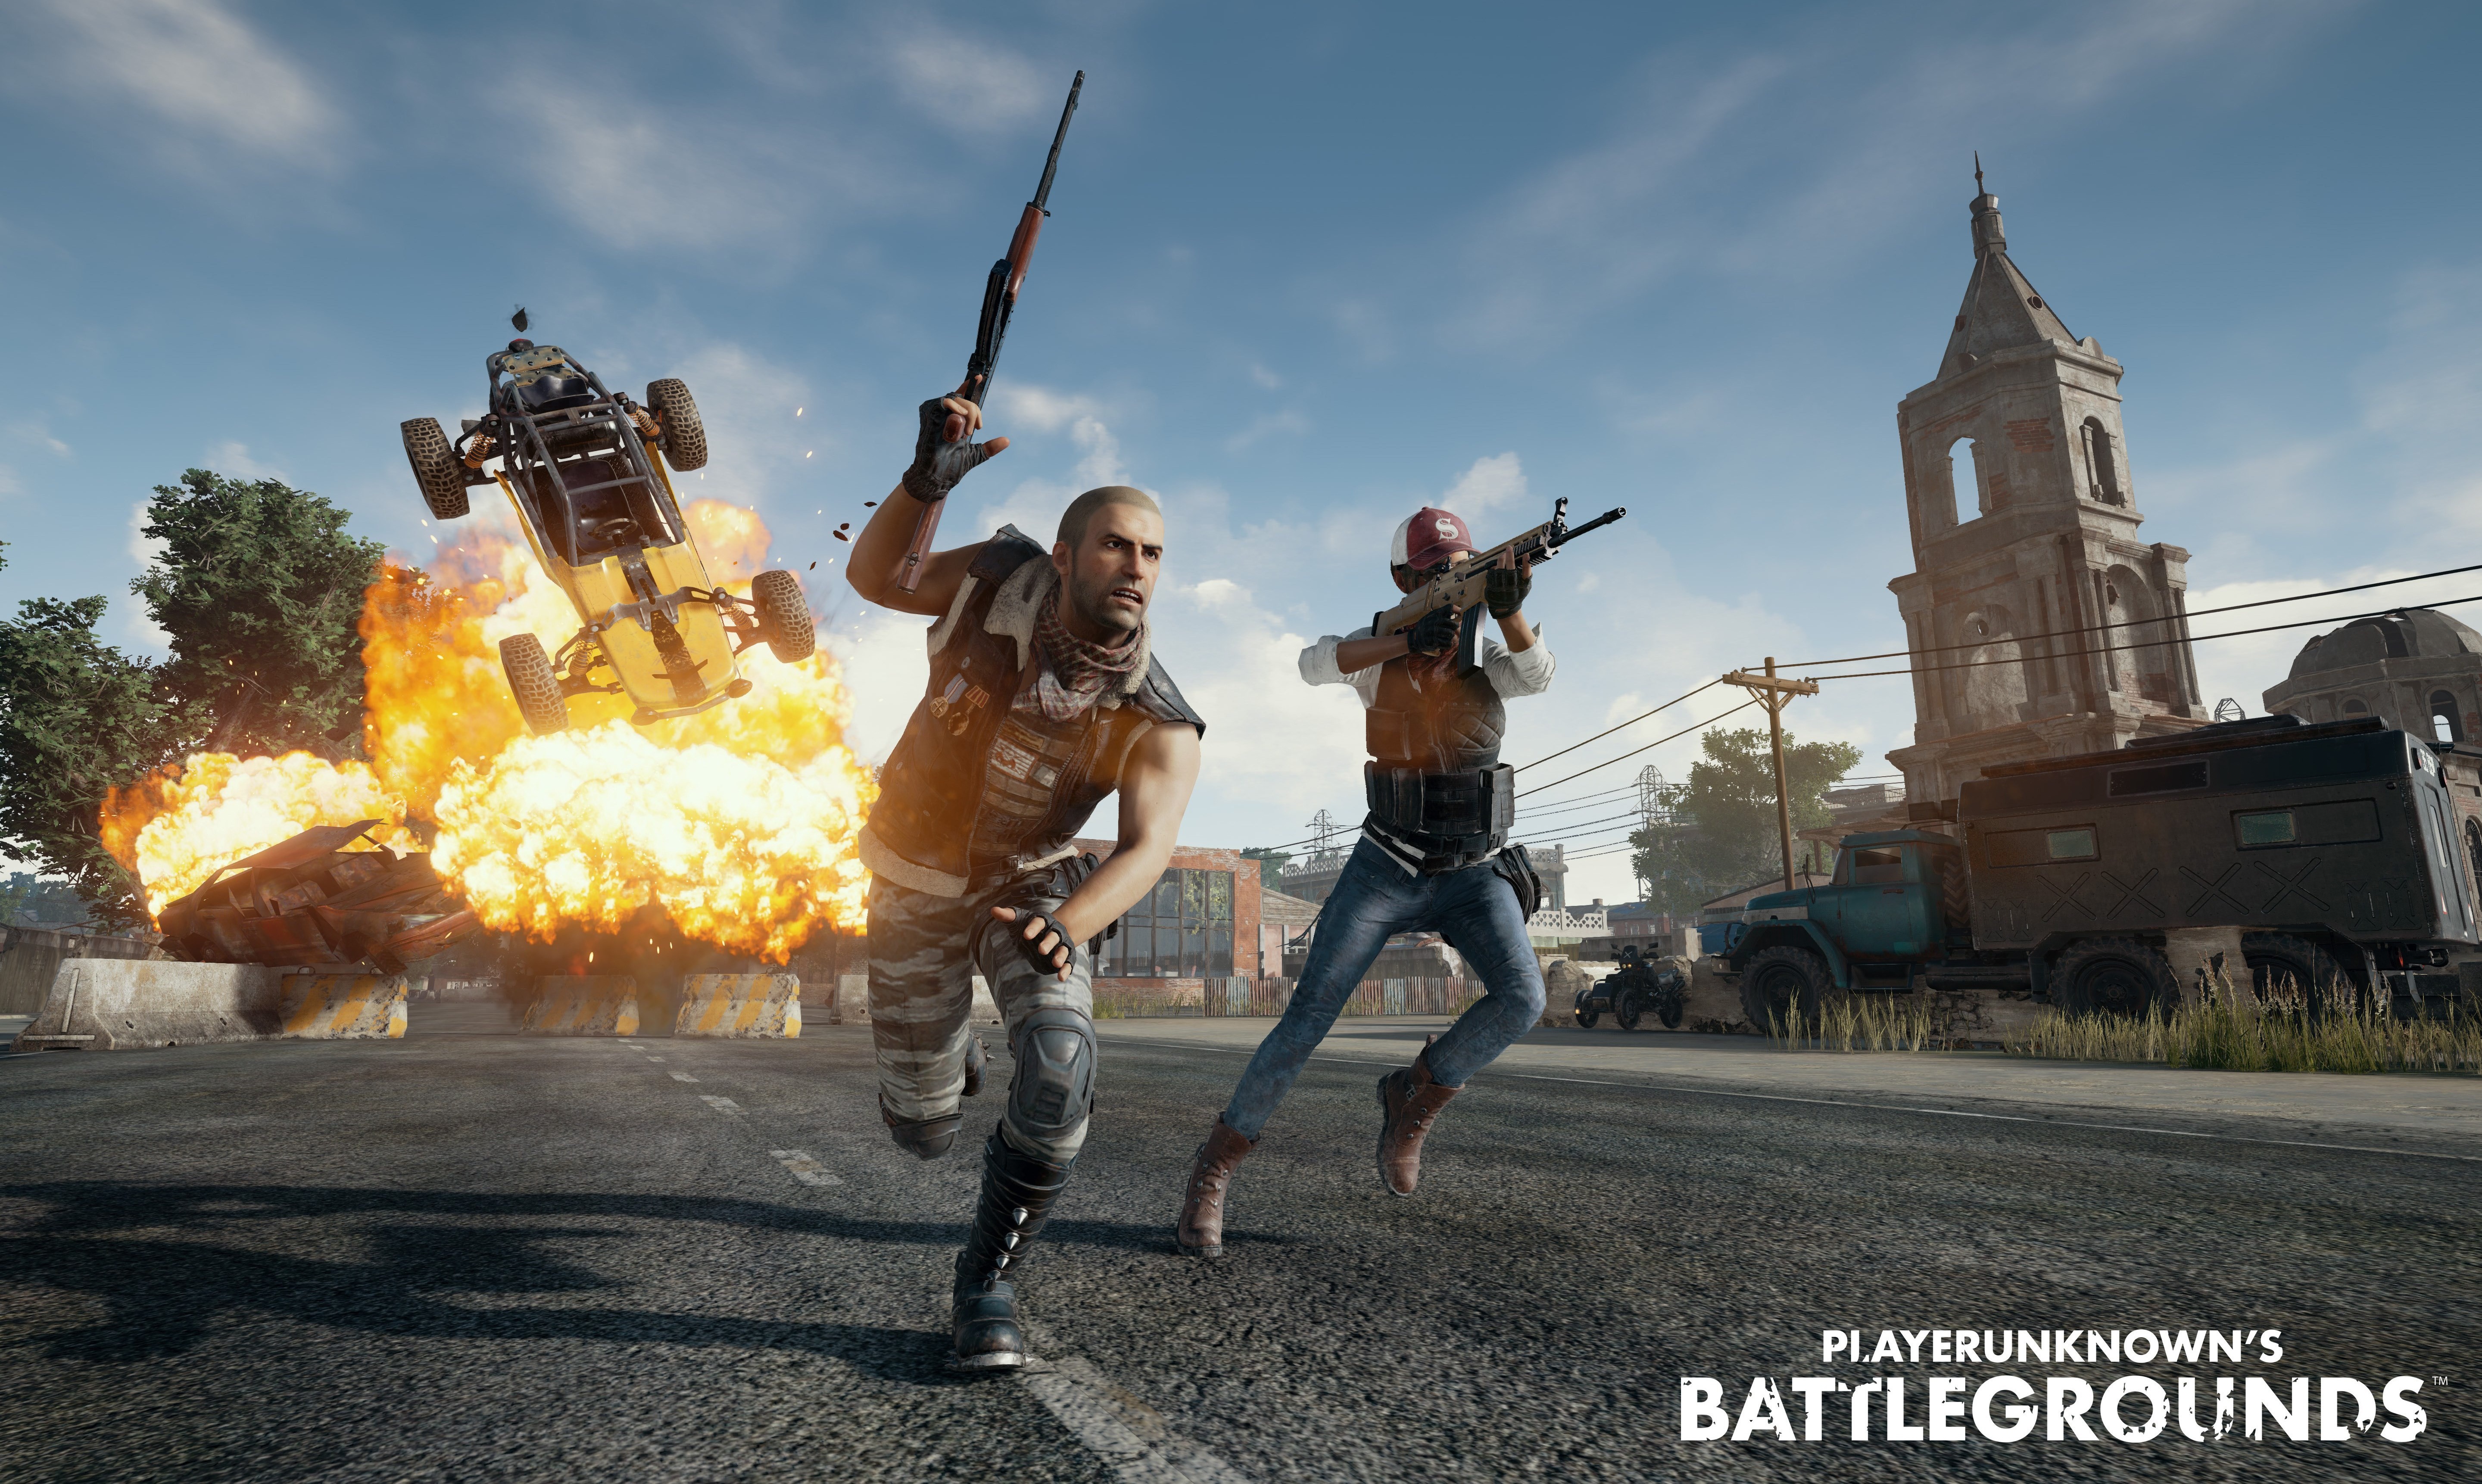 440+ PlayerUnknown's Battlegrounds HD Wallpapers and Backgrounds